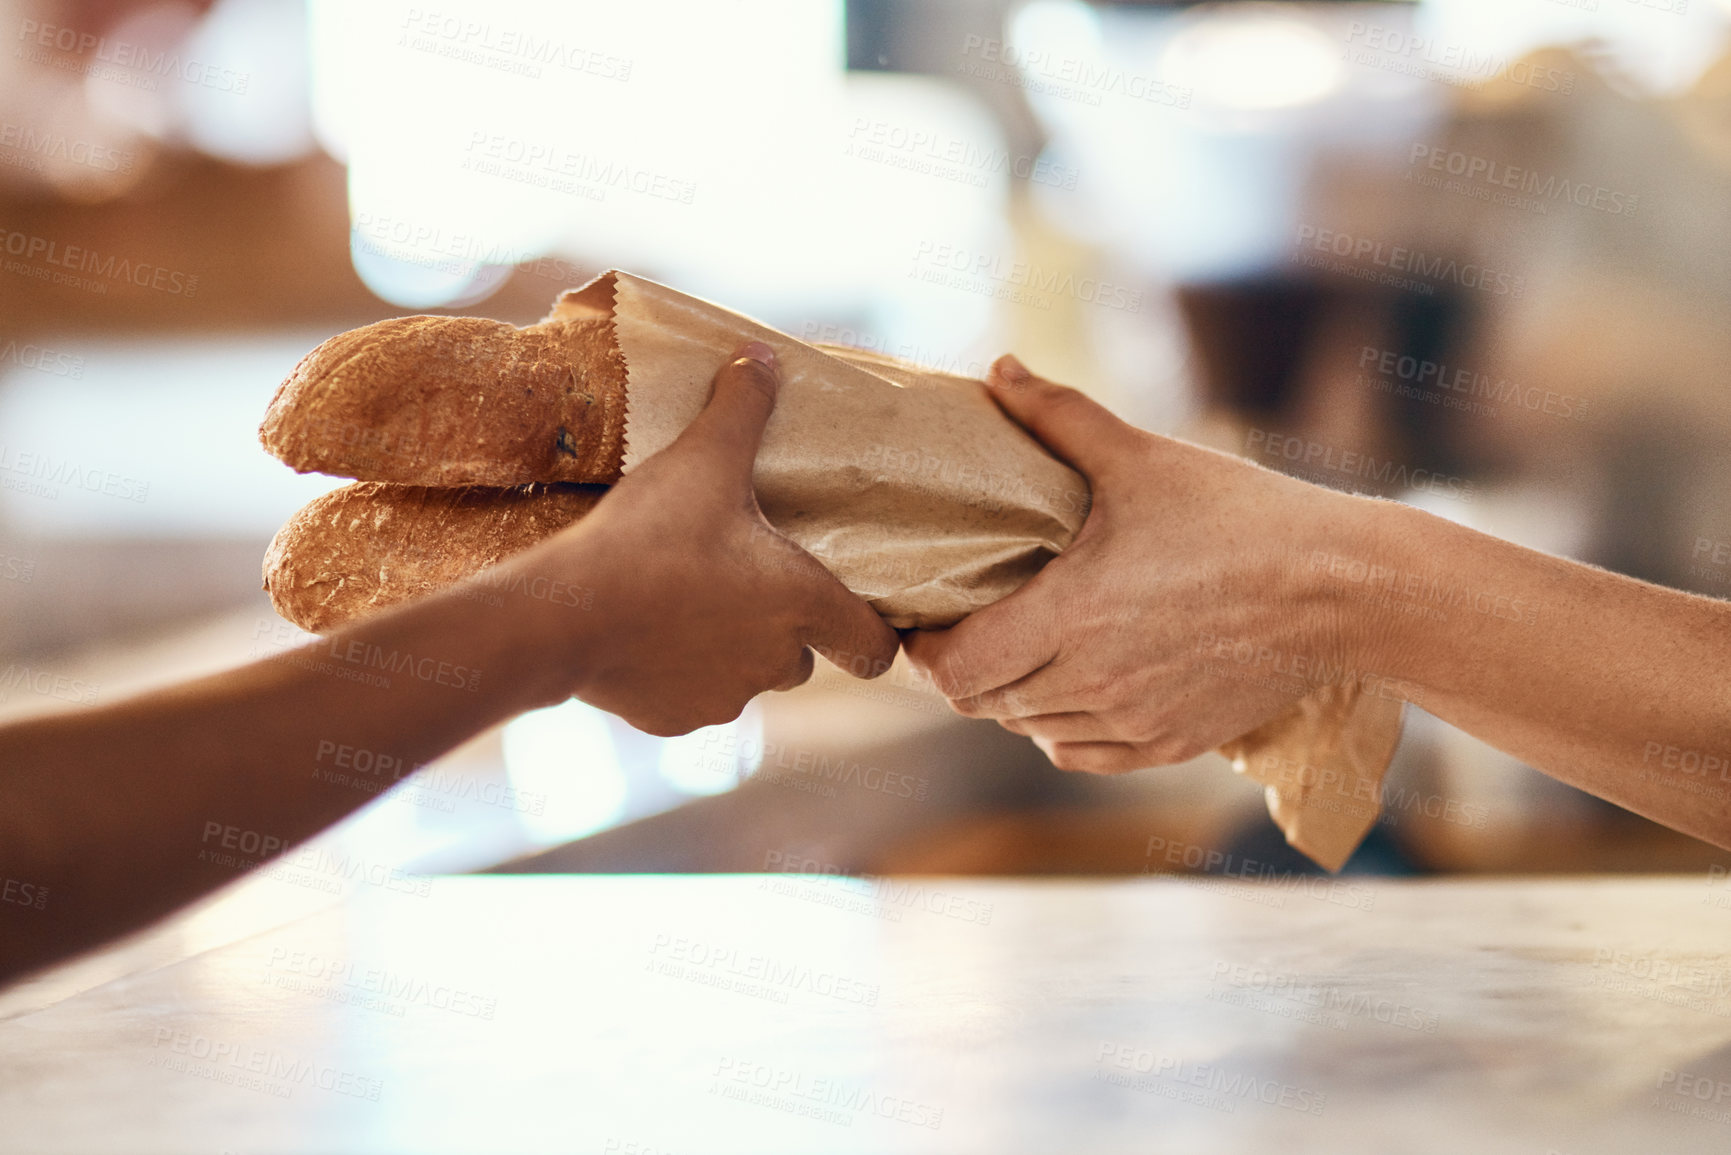 Buy stock photo Customer buying bread from bakery, purchasing baked goods and shopping for food at a shop. Hands of female client and employee giving service, taking product and helping with item at grocery store